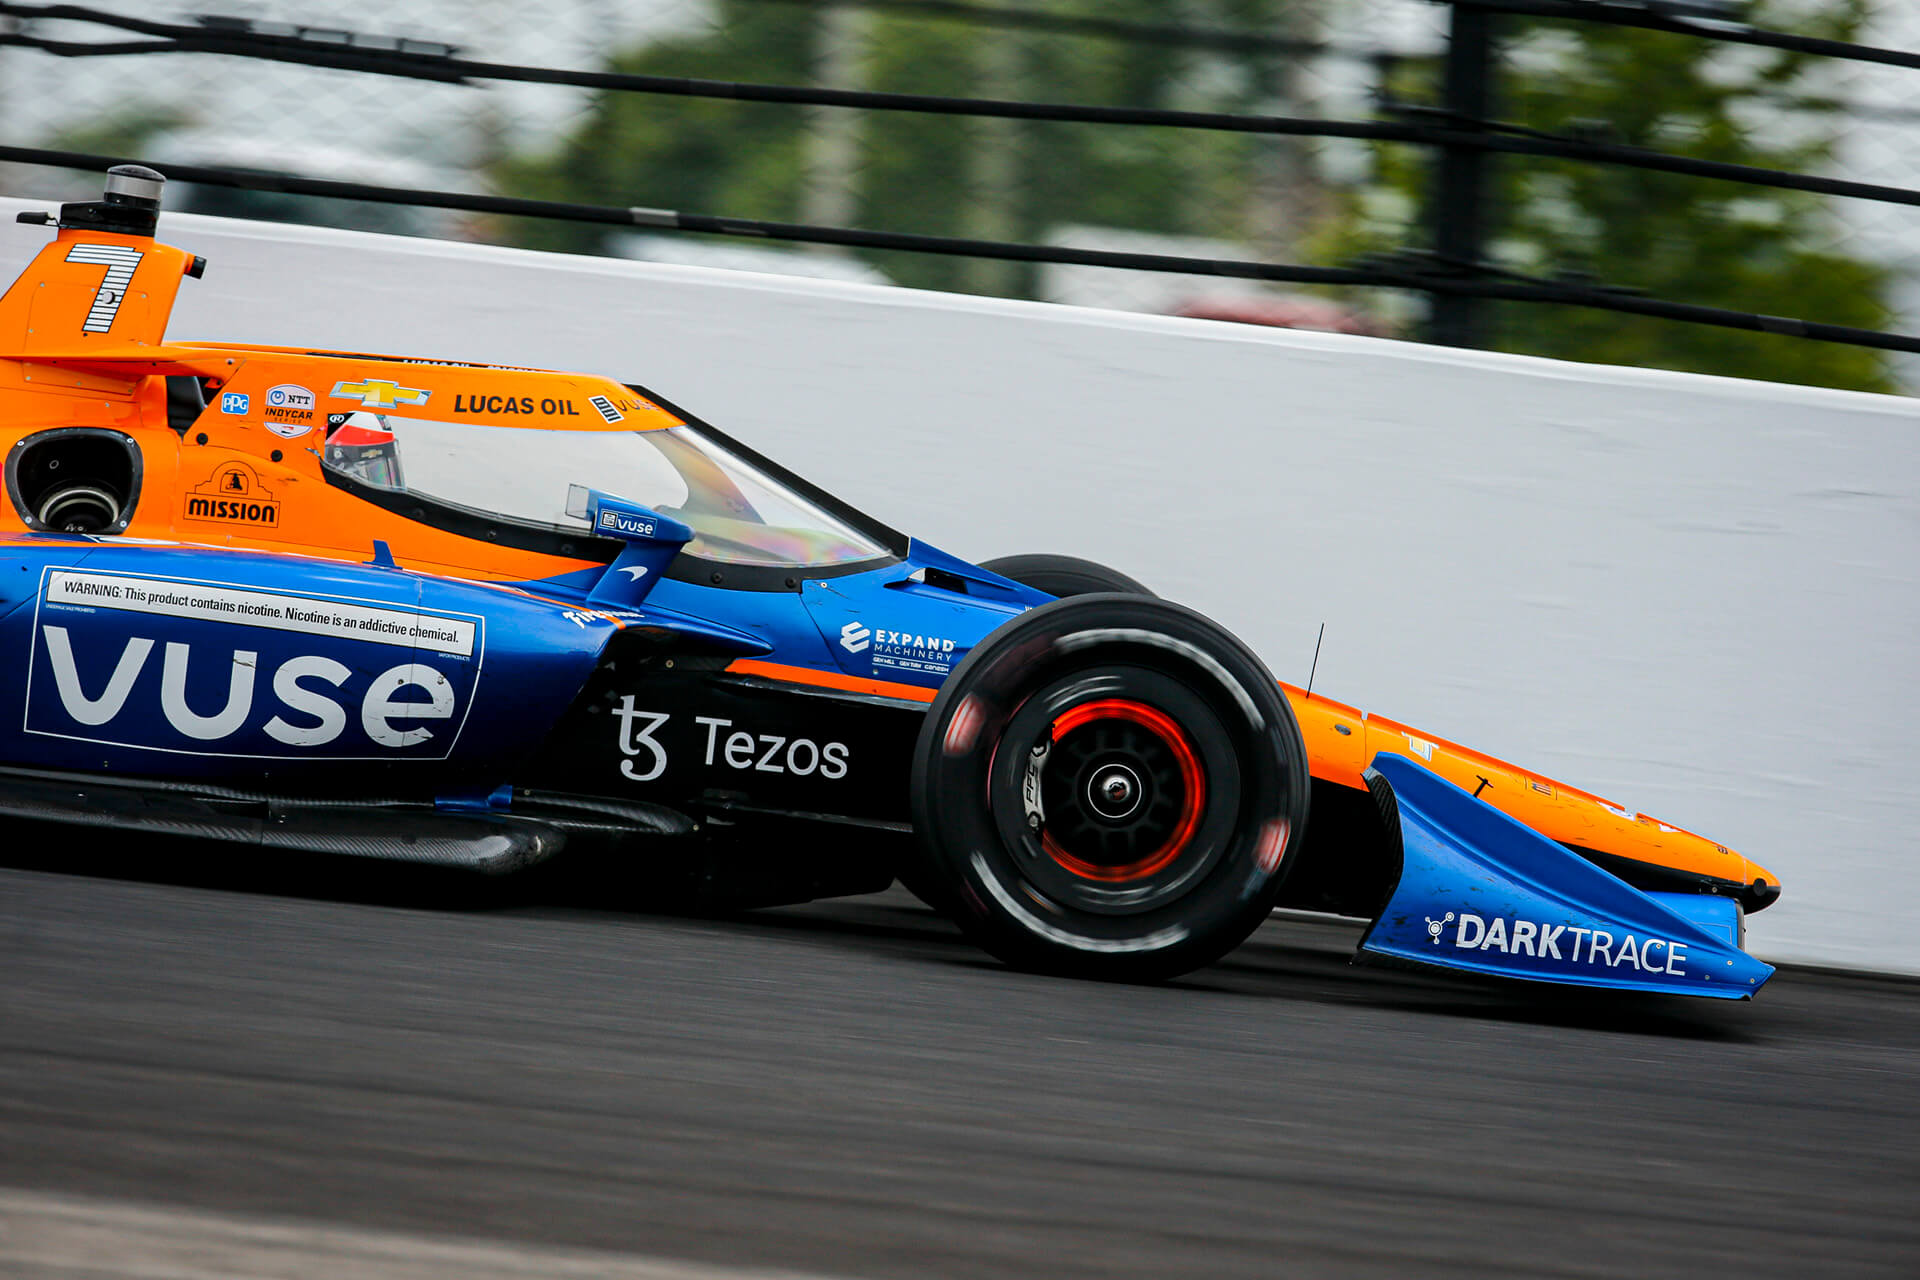 Fast motion capture of an orange and blue racecar with the Expand Machinery logo visible behind the front wheel